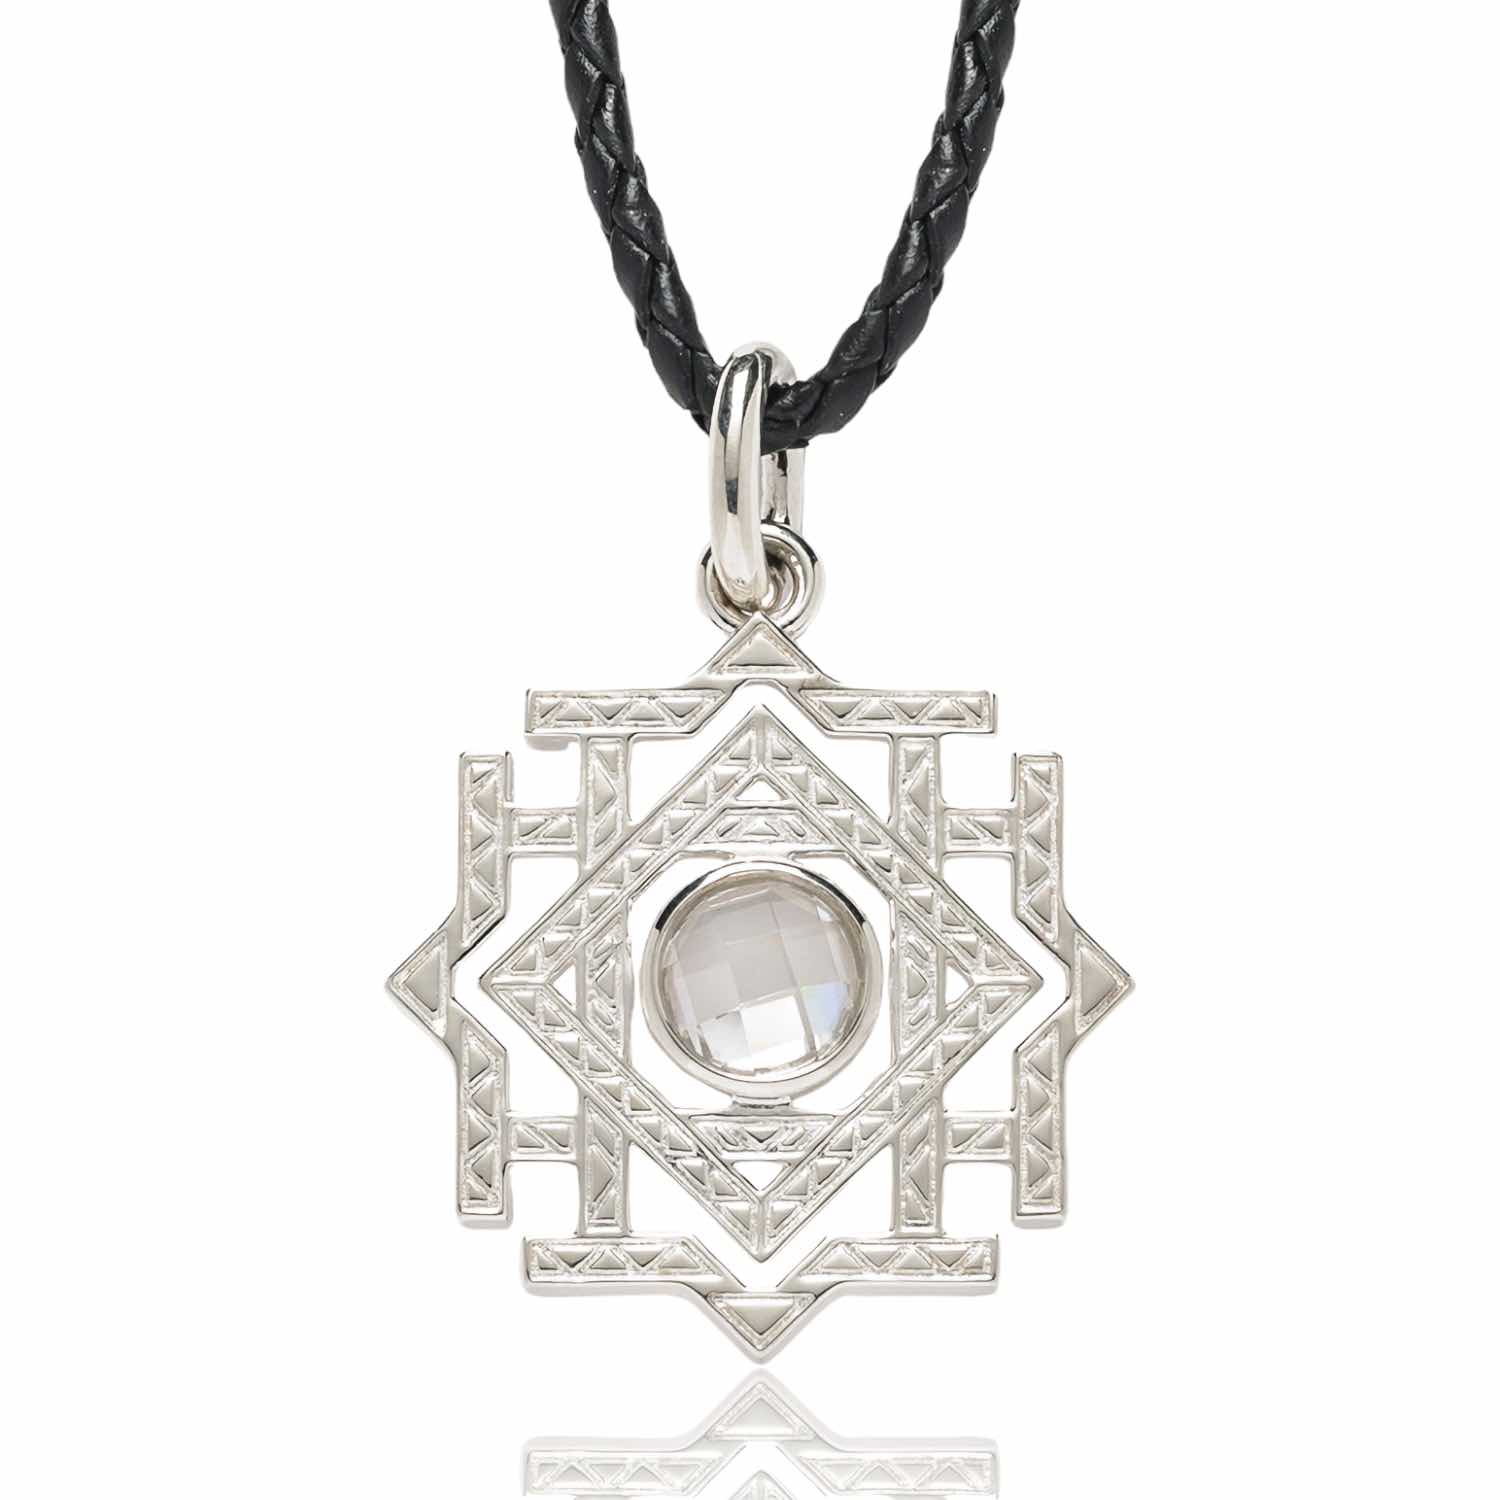 Own a piece of Middle-earth history with this officially licensed Arkenstone silver necklace and jewelry box. The perfect collectible for fans of The Hobbit, the necklace and jewelry box is beautifully designed to resemble the powerful gemstone and serves